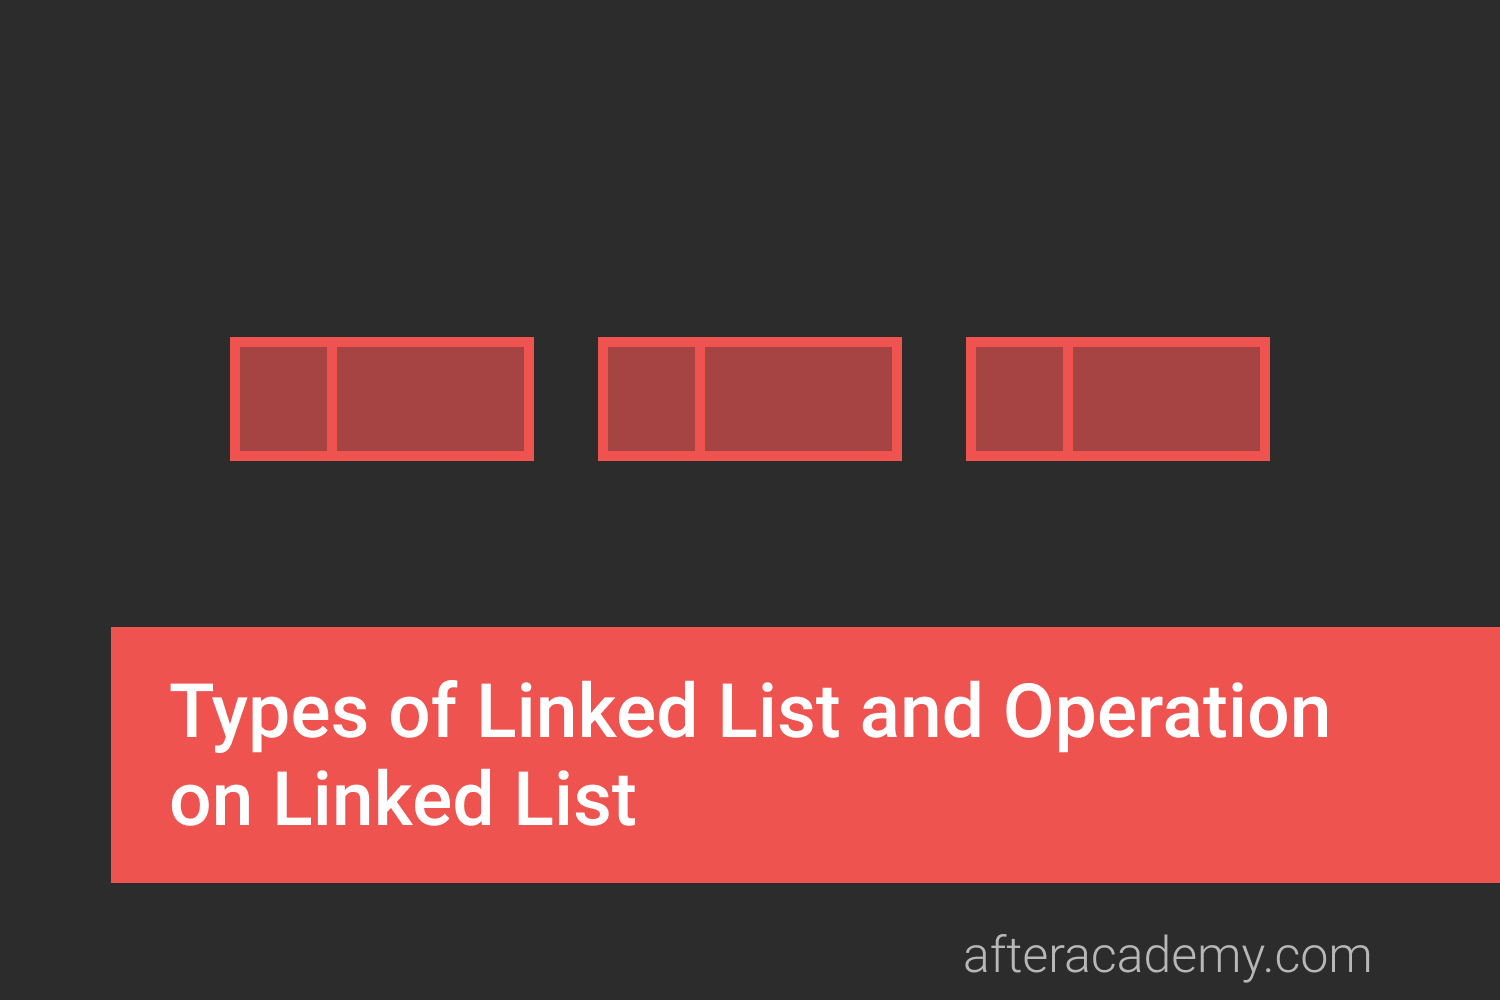 Types of Linked List and Operation on Linked List